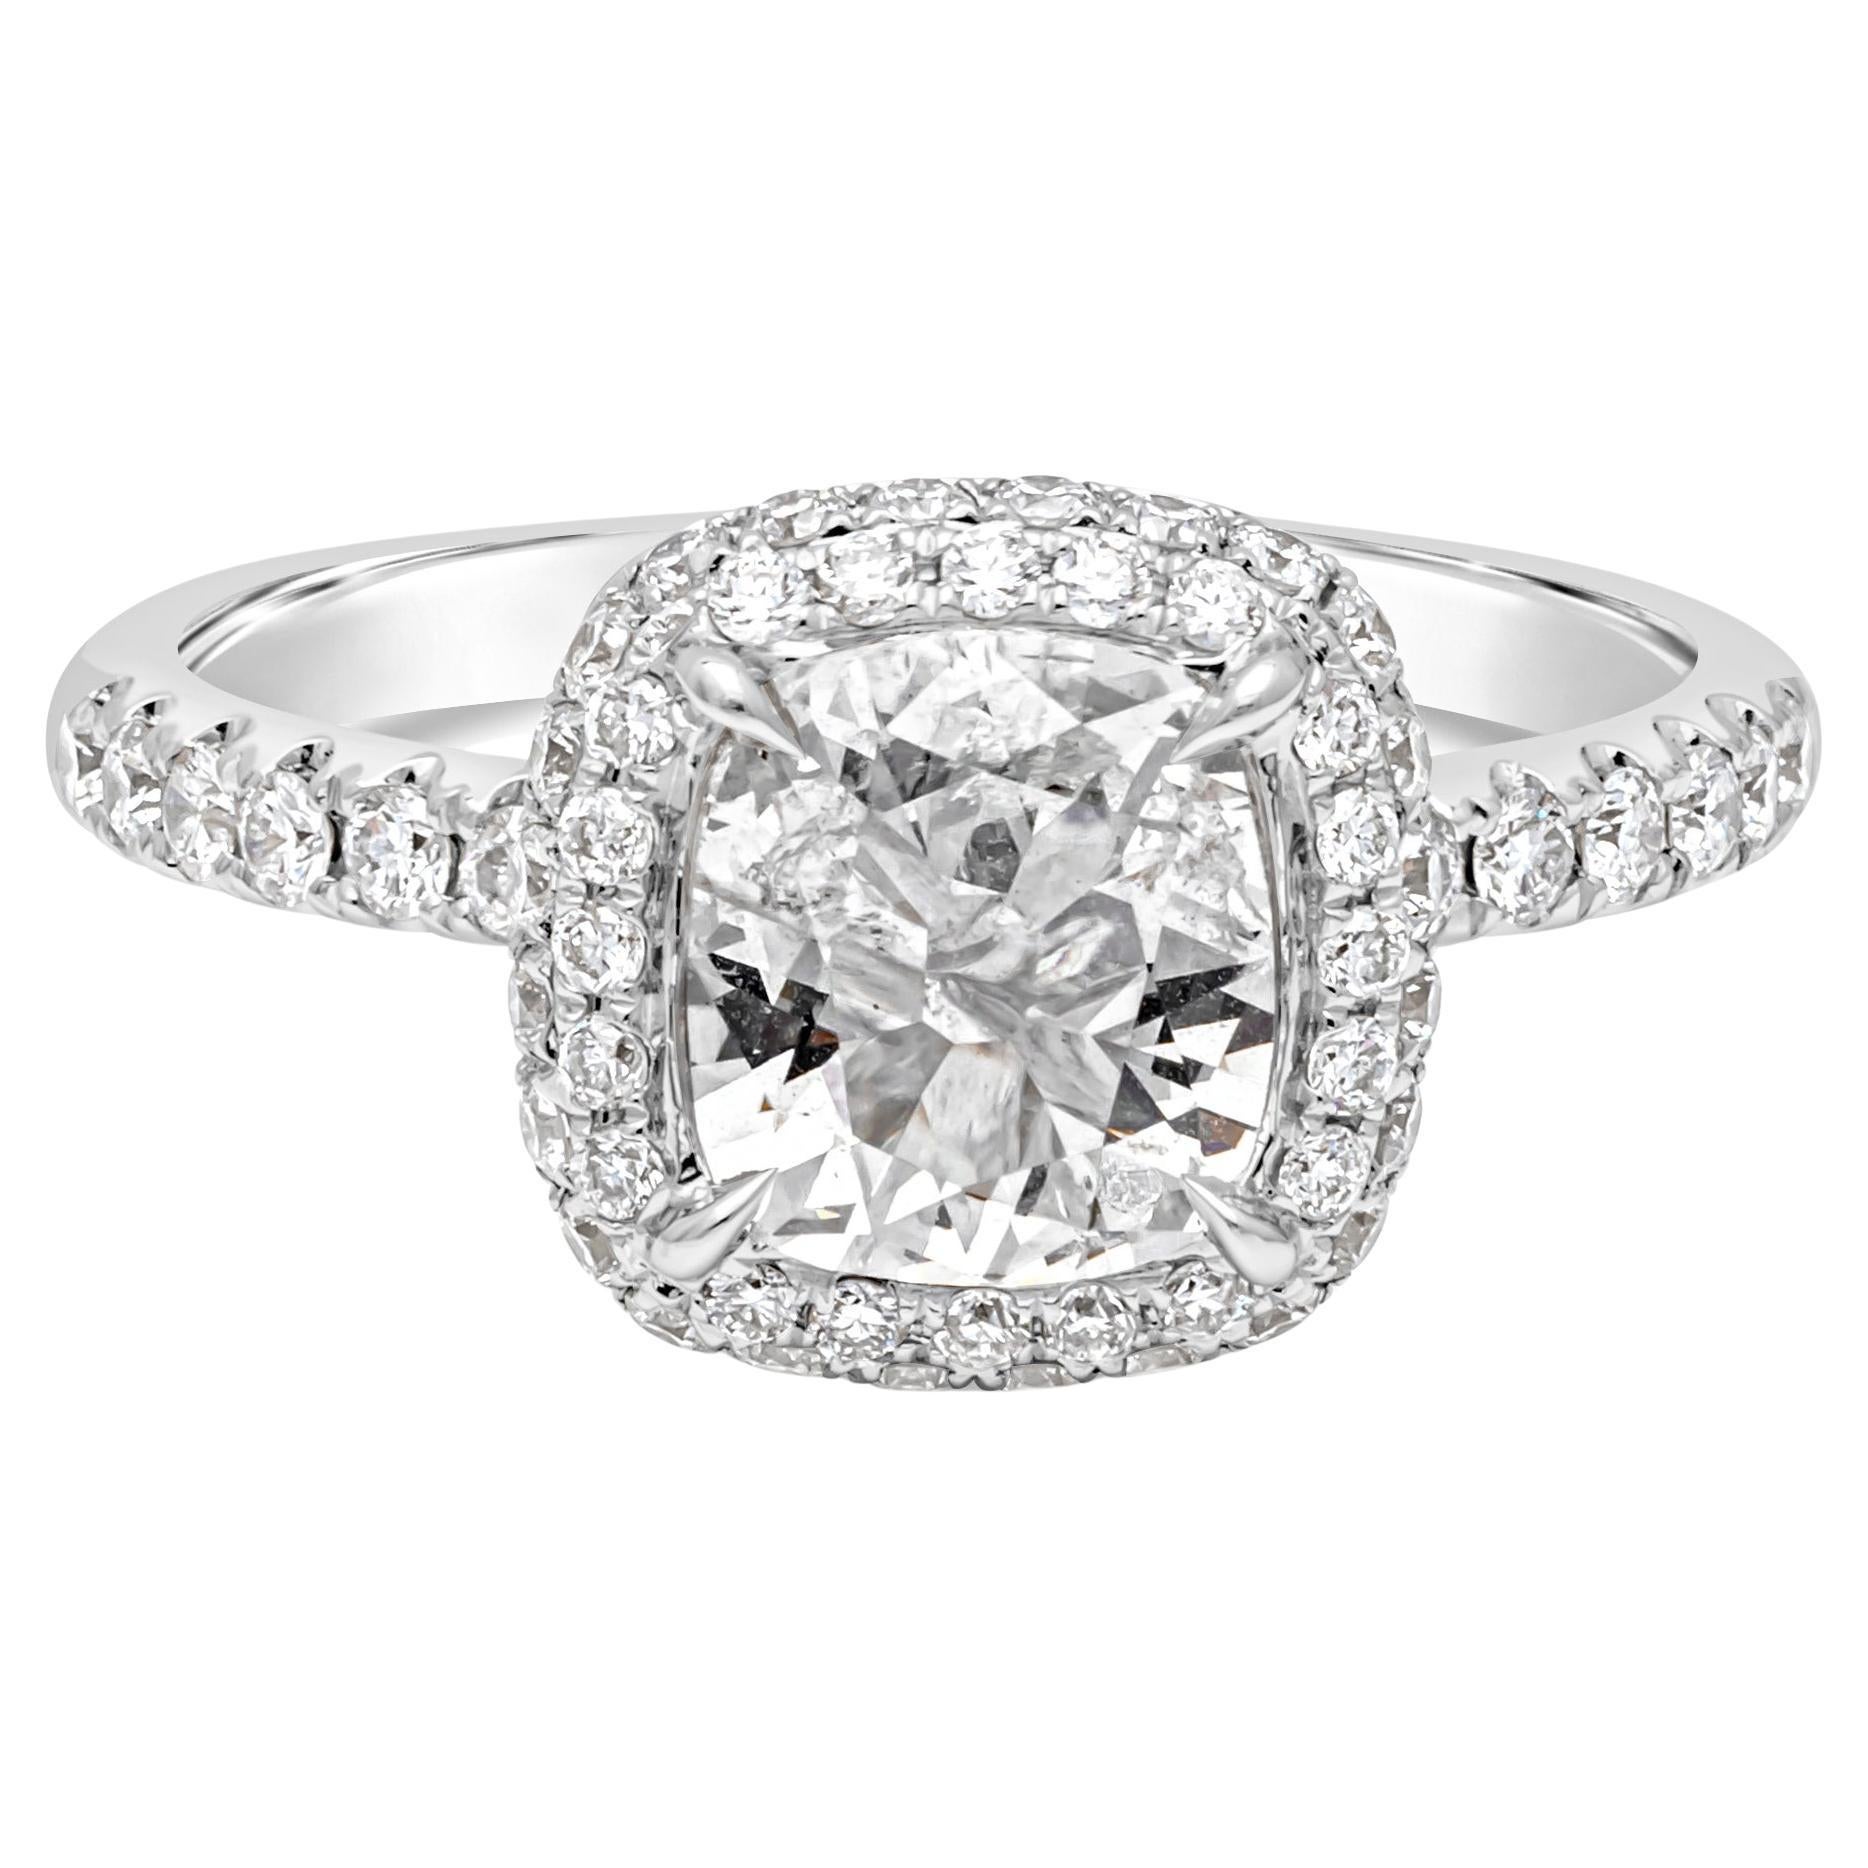 Brilliant and elegantly made halo engagement ring showcasing a EGL certified 0.91 carats cushion cut diamond, F Color and SI2 in Clarity. Set in a four prong setting and surrounded by a row of brilliant round diamonds. Set in a half eternity pave